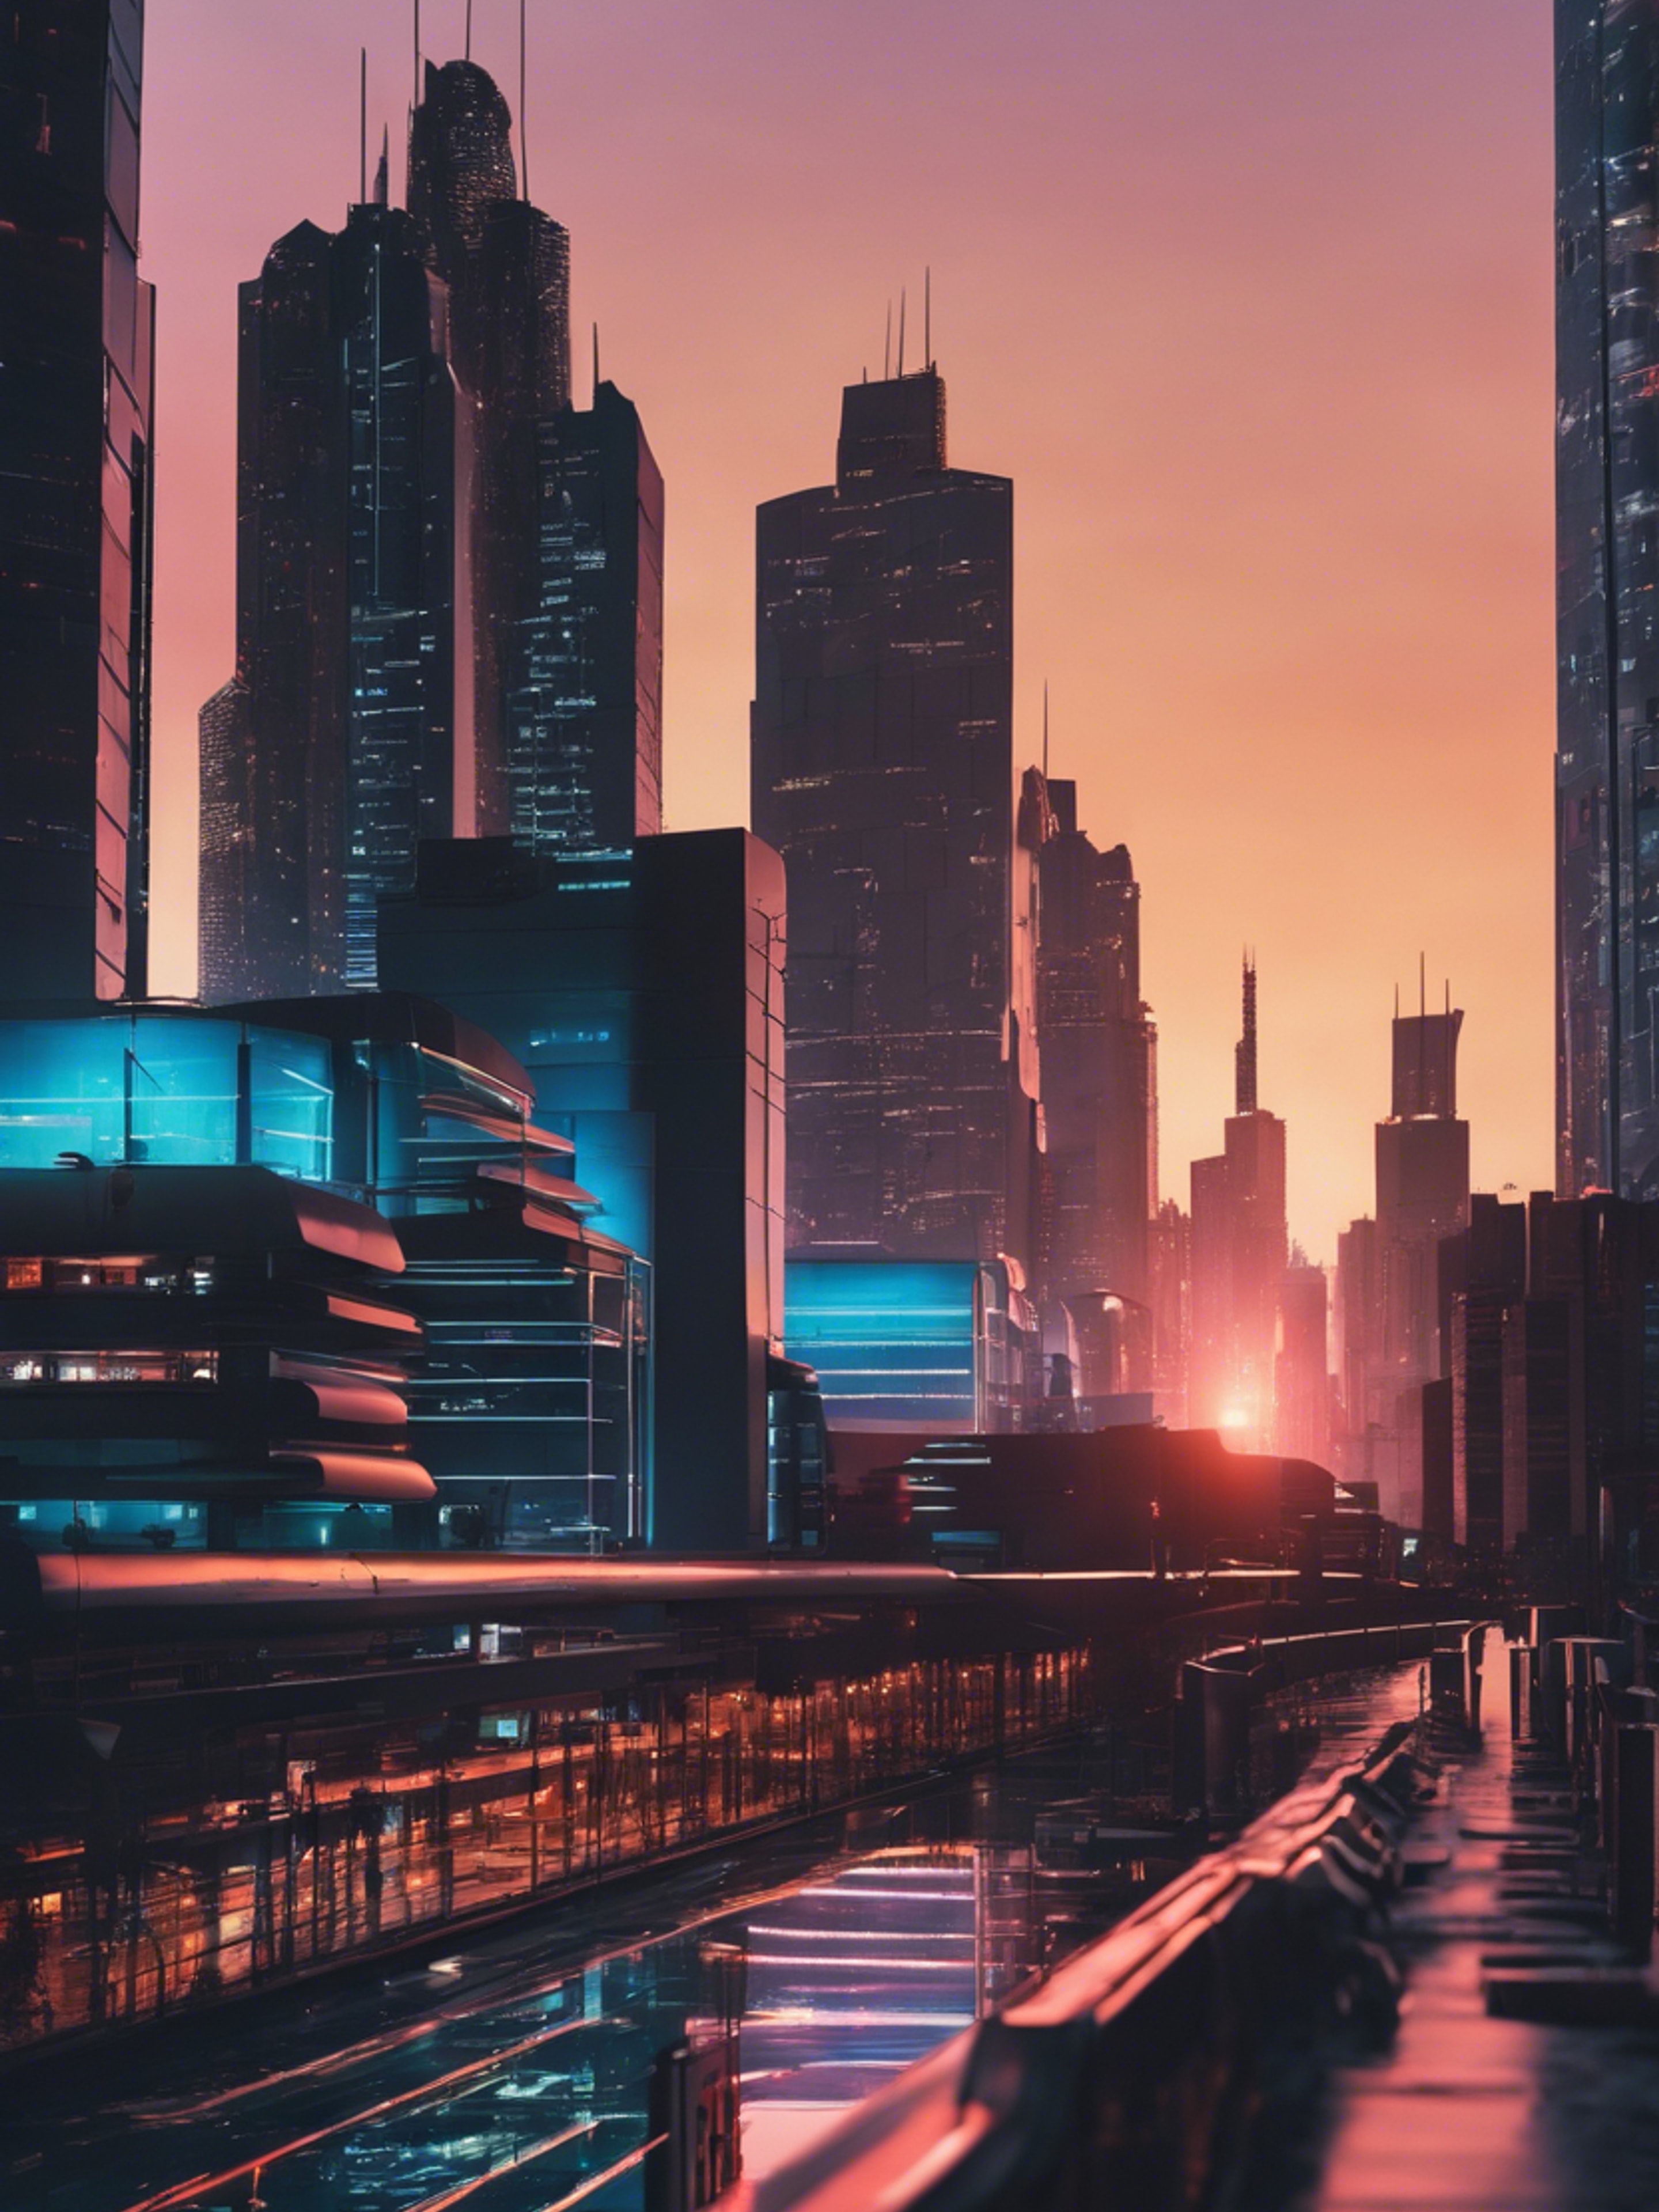 A sleek, futuristic cityscape at sunset, with buildings made of reflective black glass, sparking with cool neon lights.壁紙[602b1b36f4744978842c]